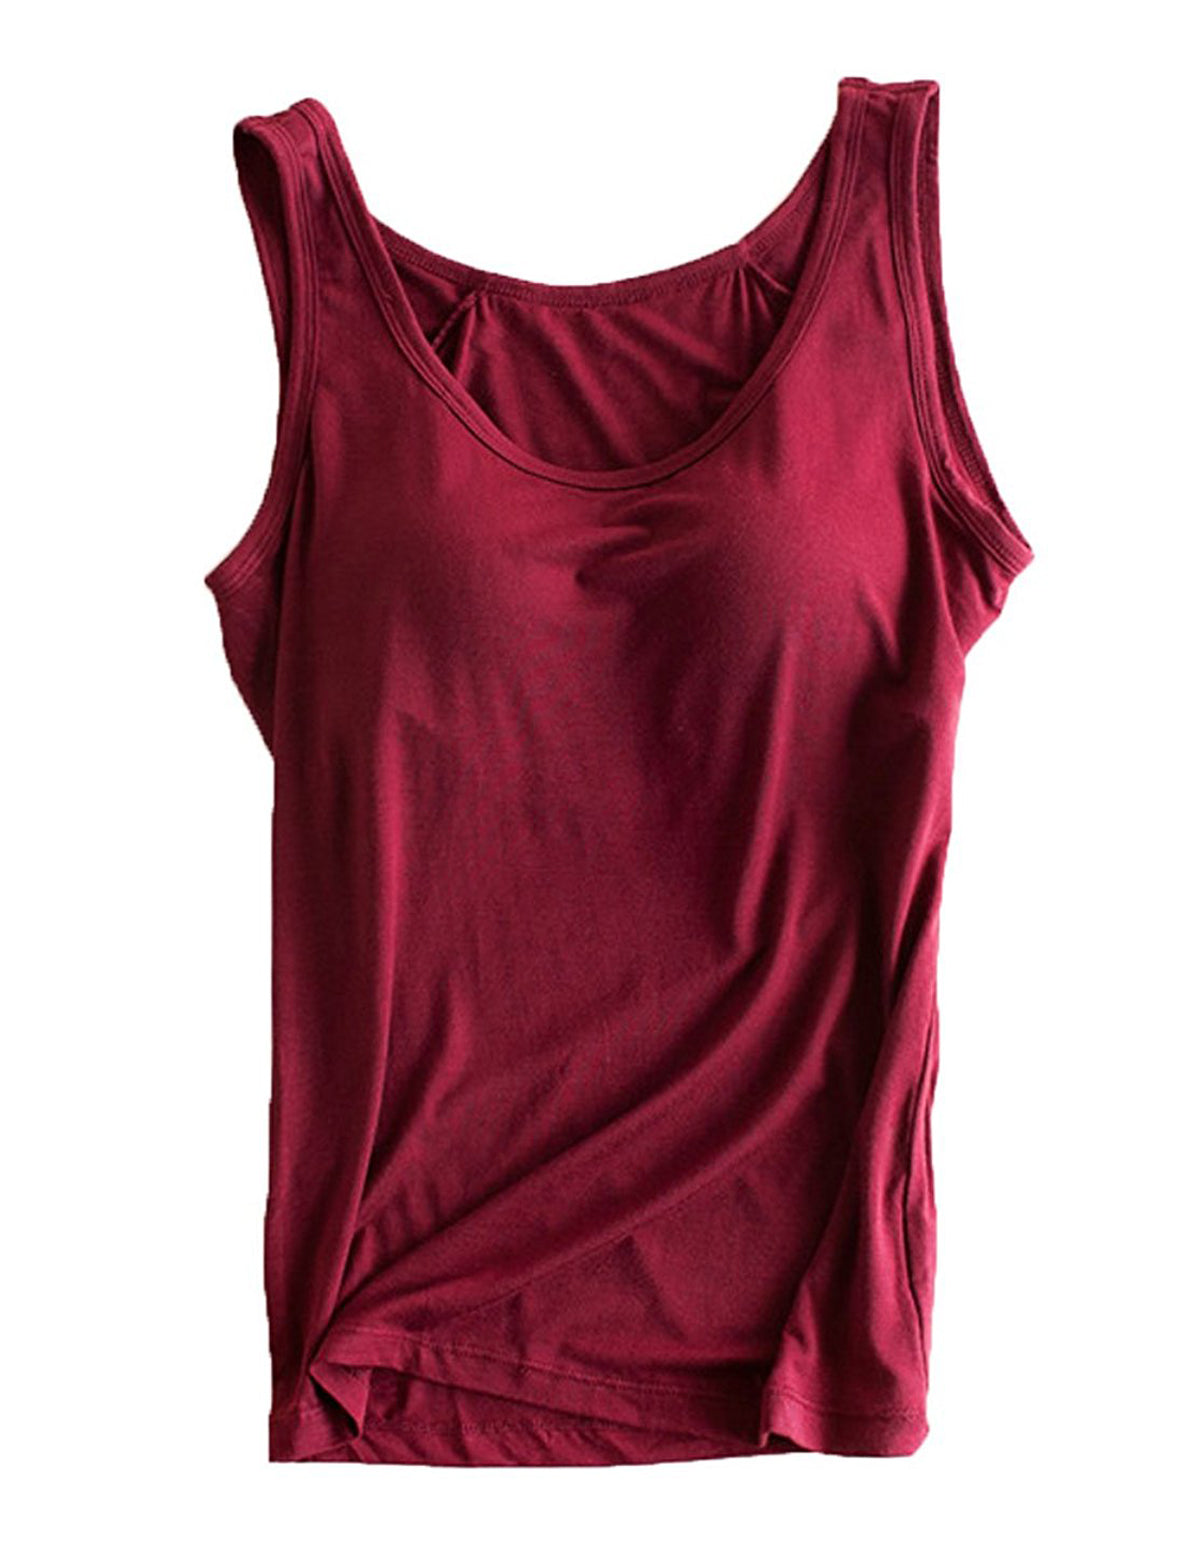 Modernform Camisole Top with Built in Padded Bra Cotton CrossBack